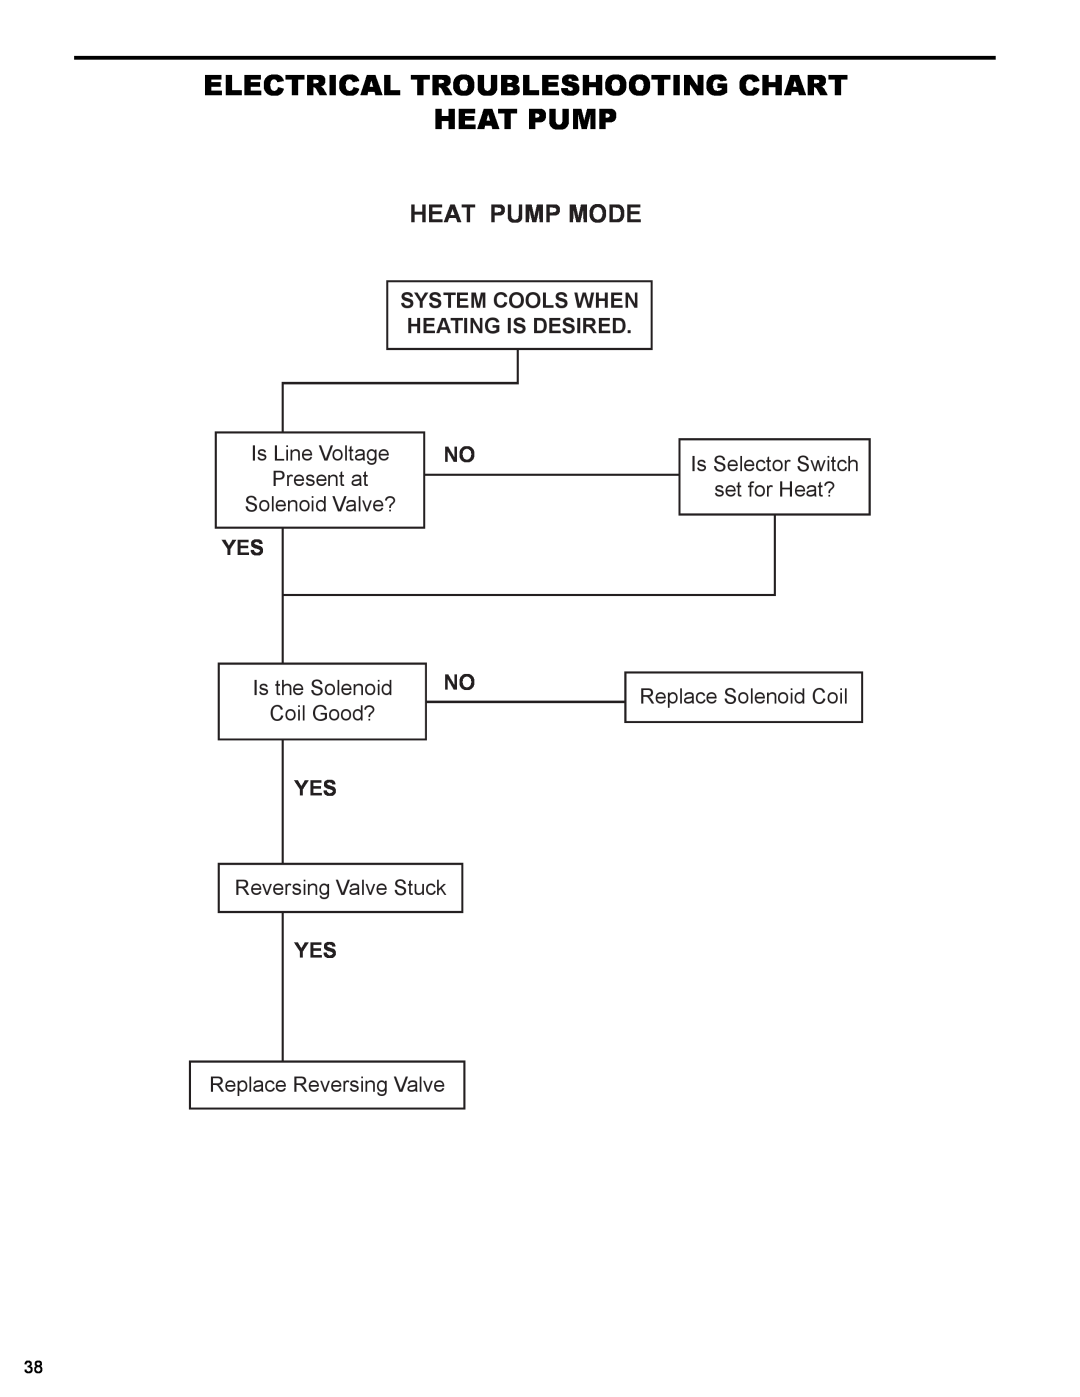 Friedrich R410A manual Electrical Troubleshooting Chart Heat Pump, Heat Pump Mode, System Cools When Heating Is Desired 